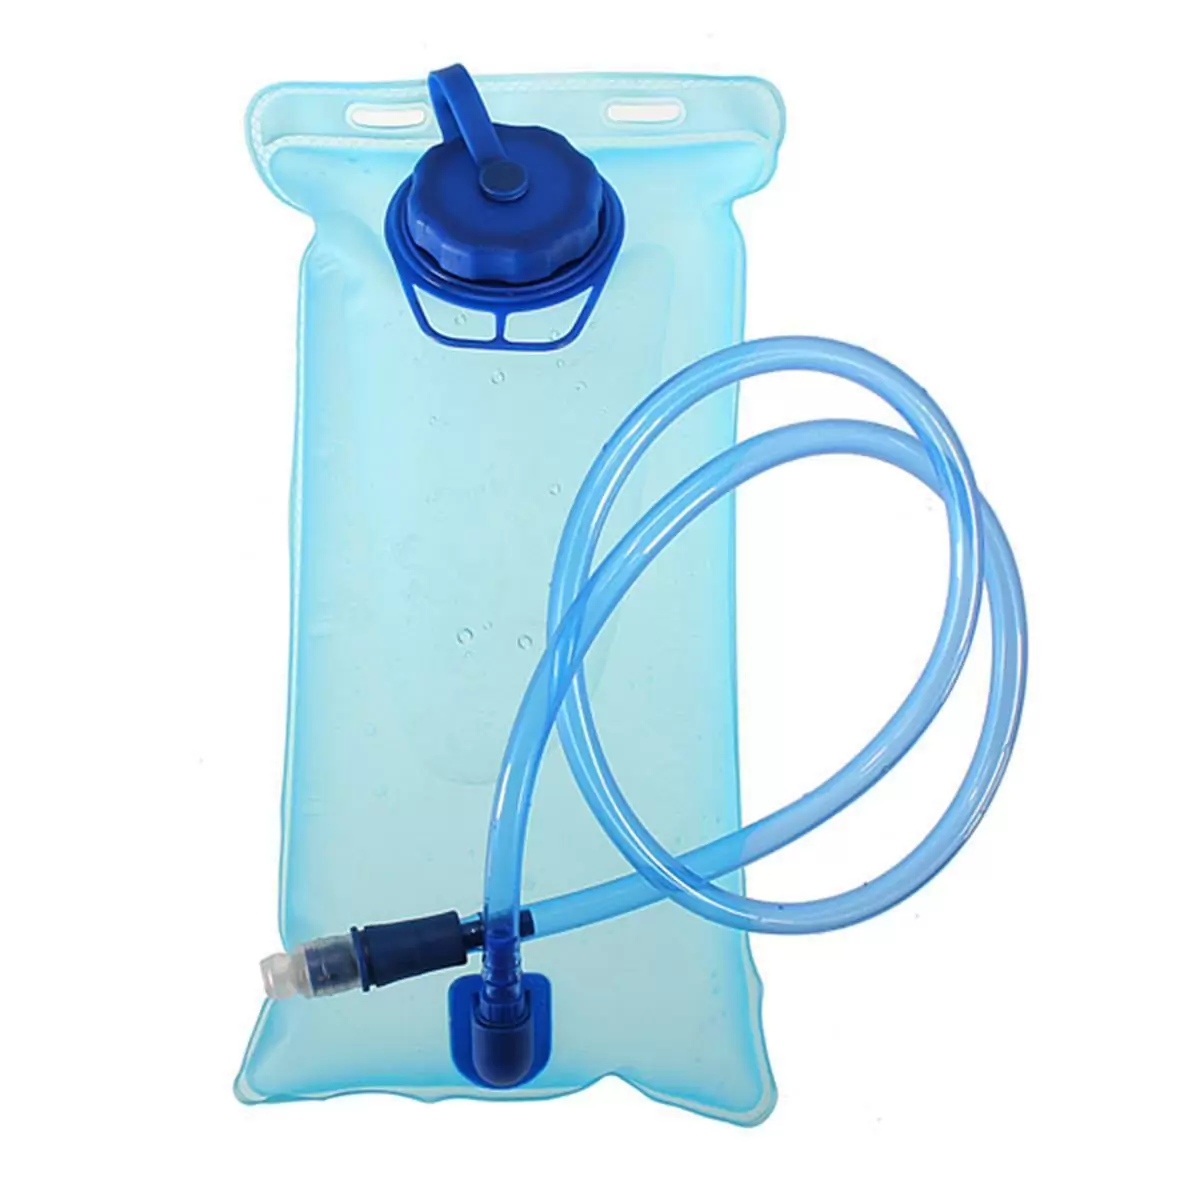 water bag 1,5 litres for hydration backpack - image